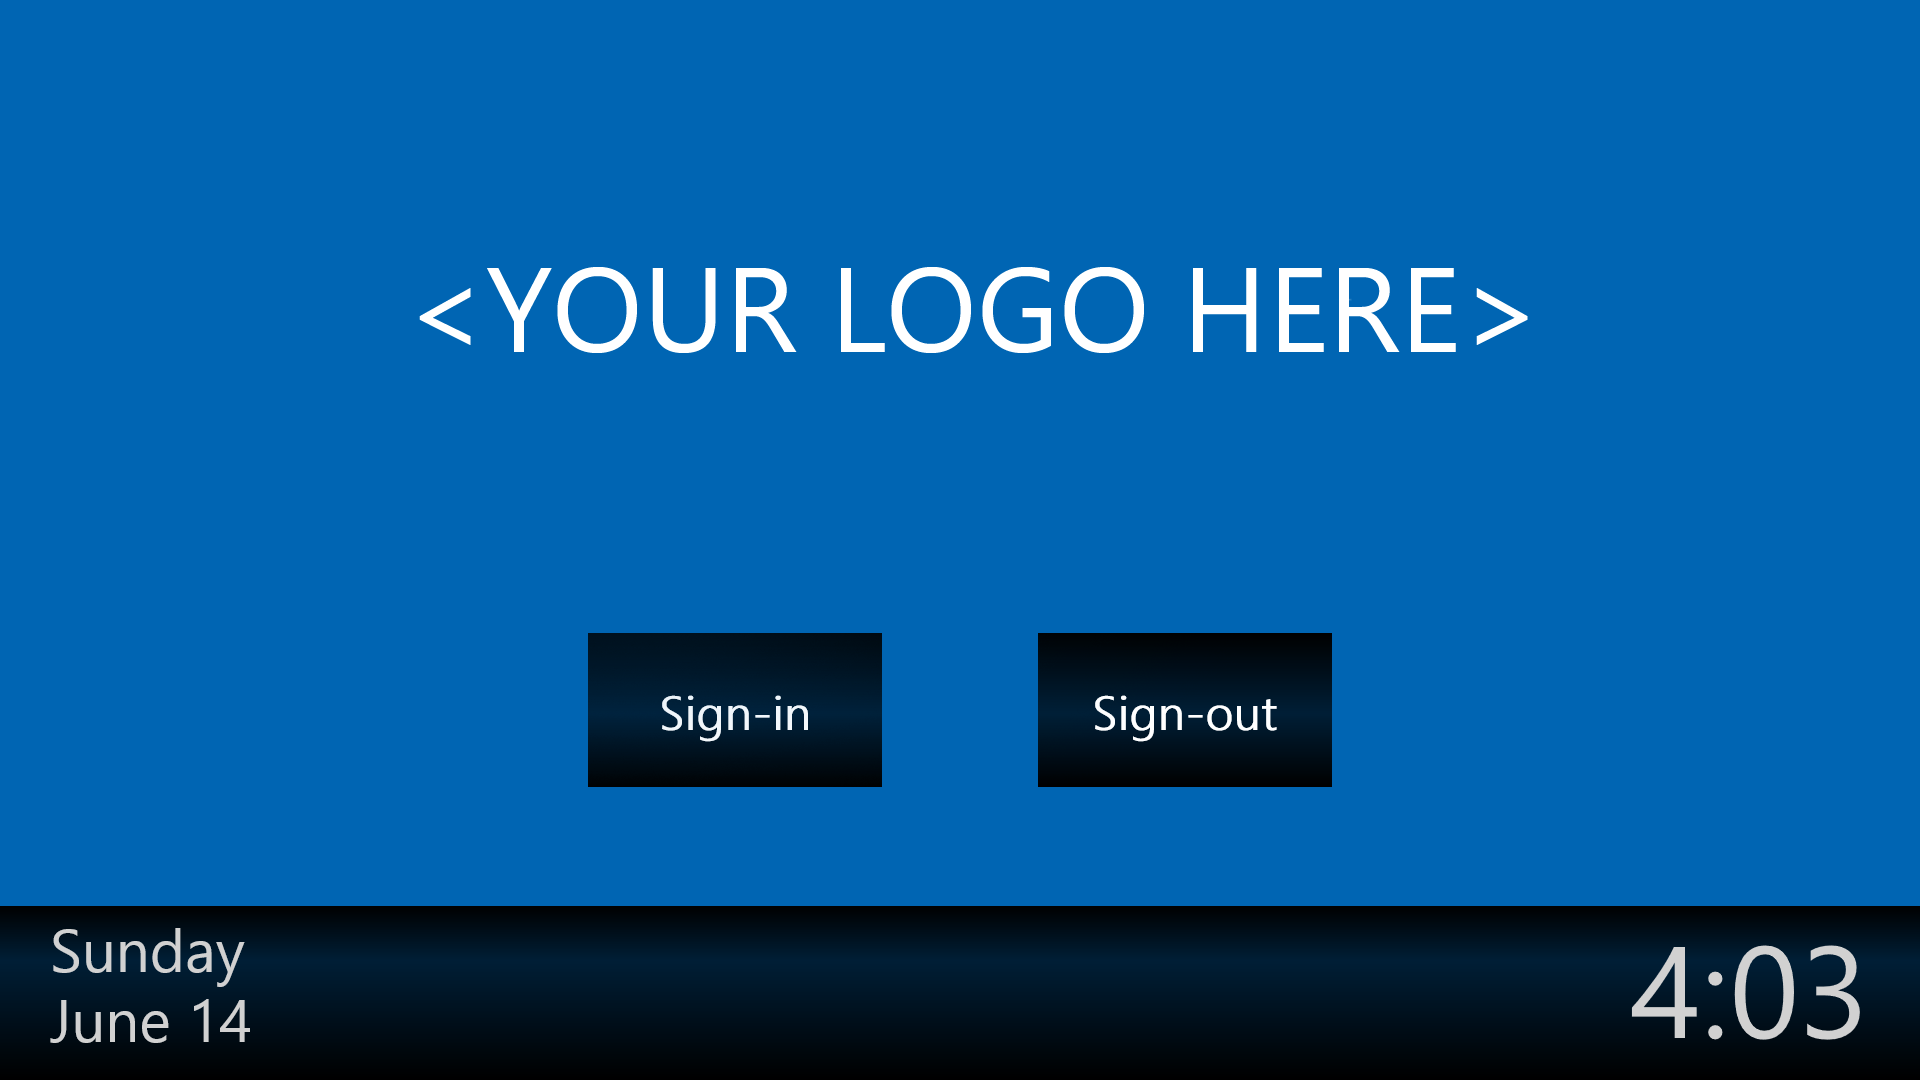 Add your own logo